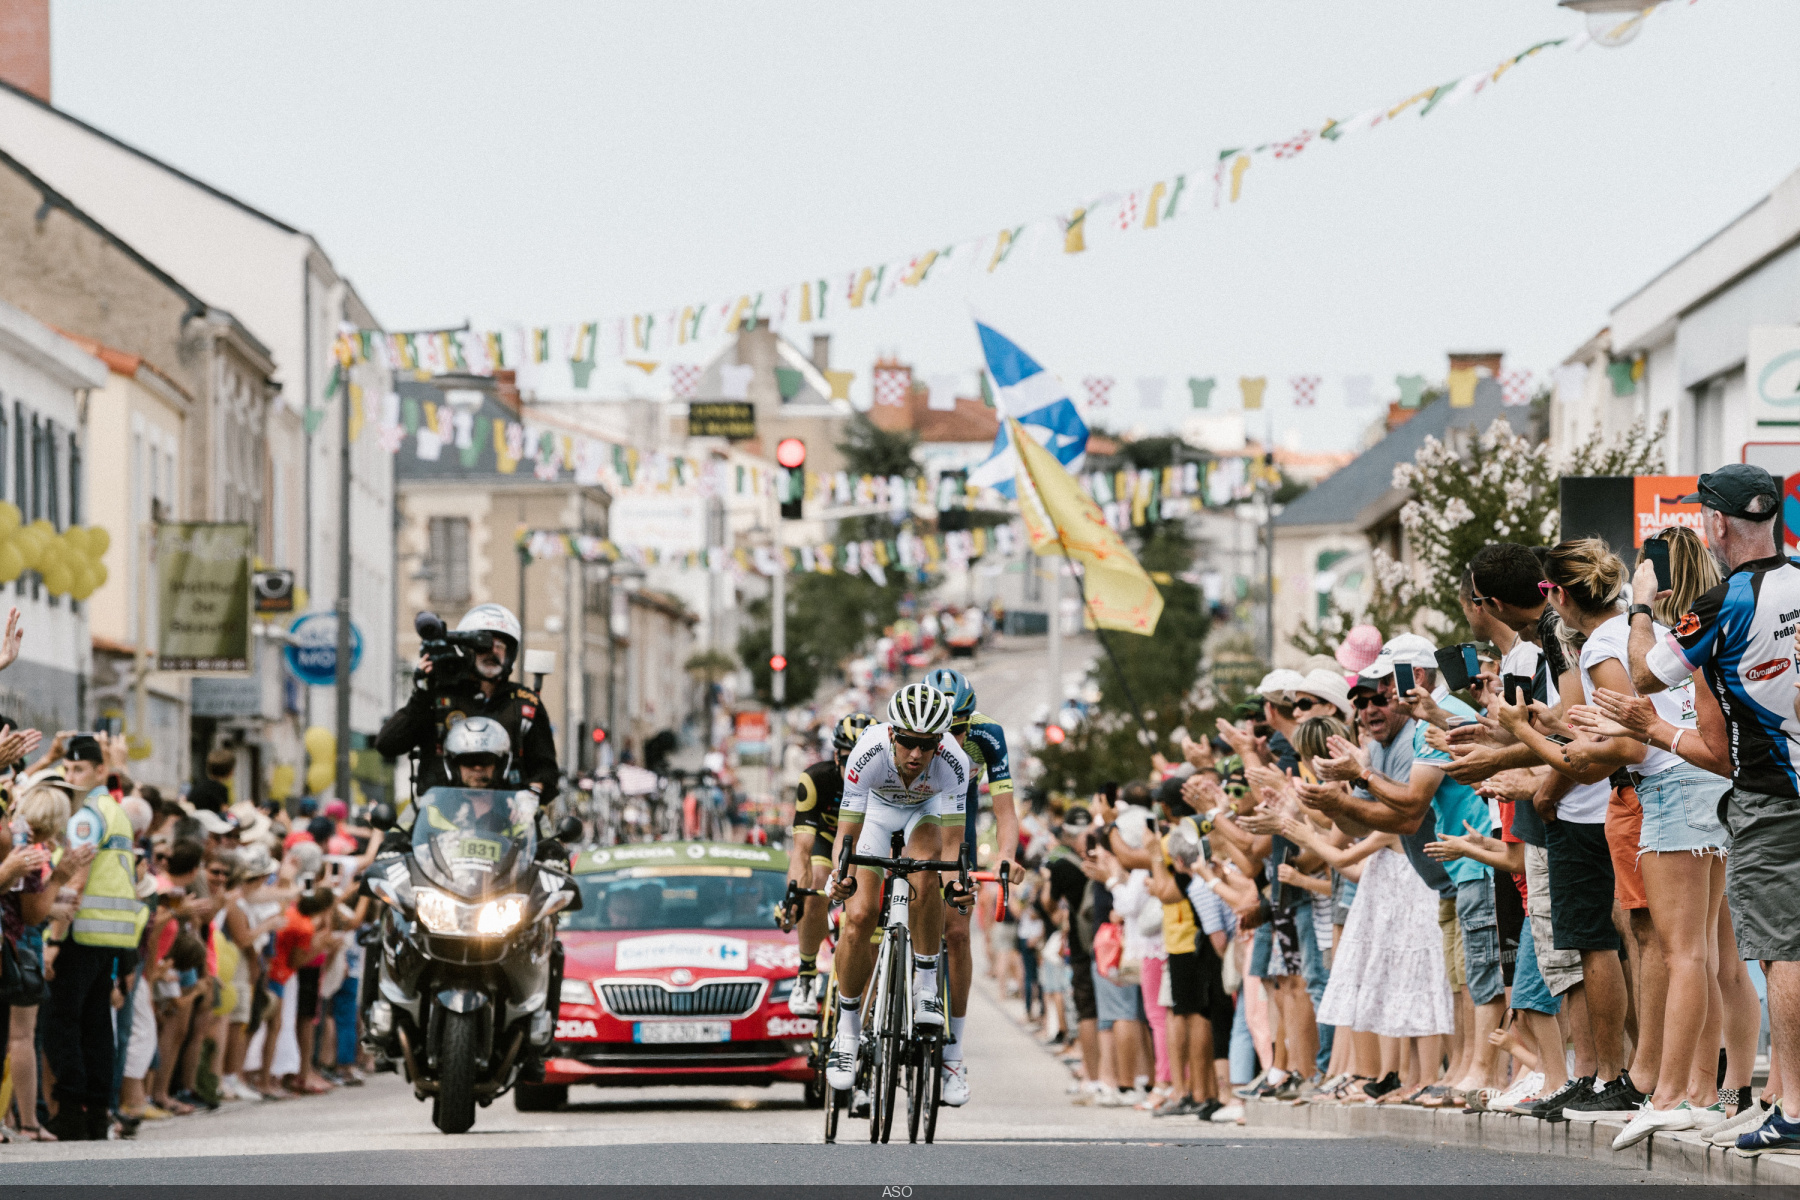 Tour de France 2023 which channel to watch the Grande Boucle on in July?